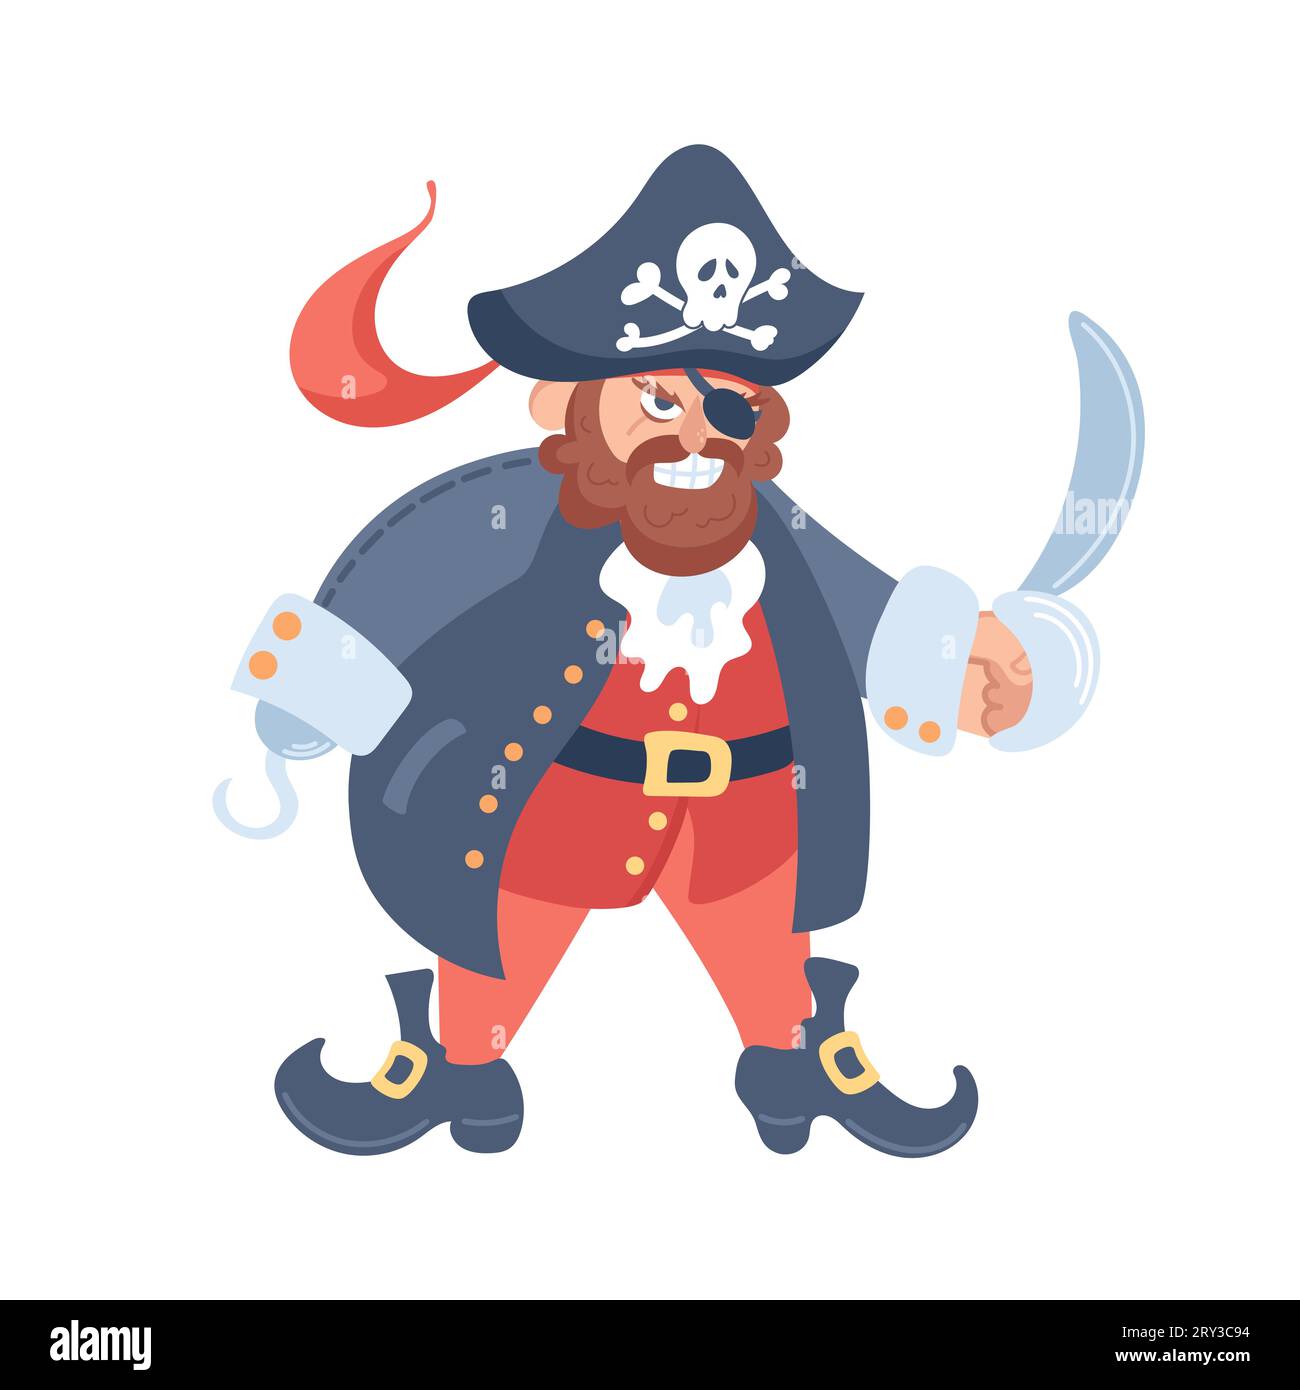 Angry pirate character in a cocked hat with a saber. A hook instead of a hand. Cartoon vector illustration armed male bandit sailor, fantasy marine vi Stock Vector